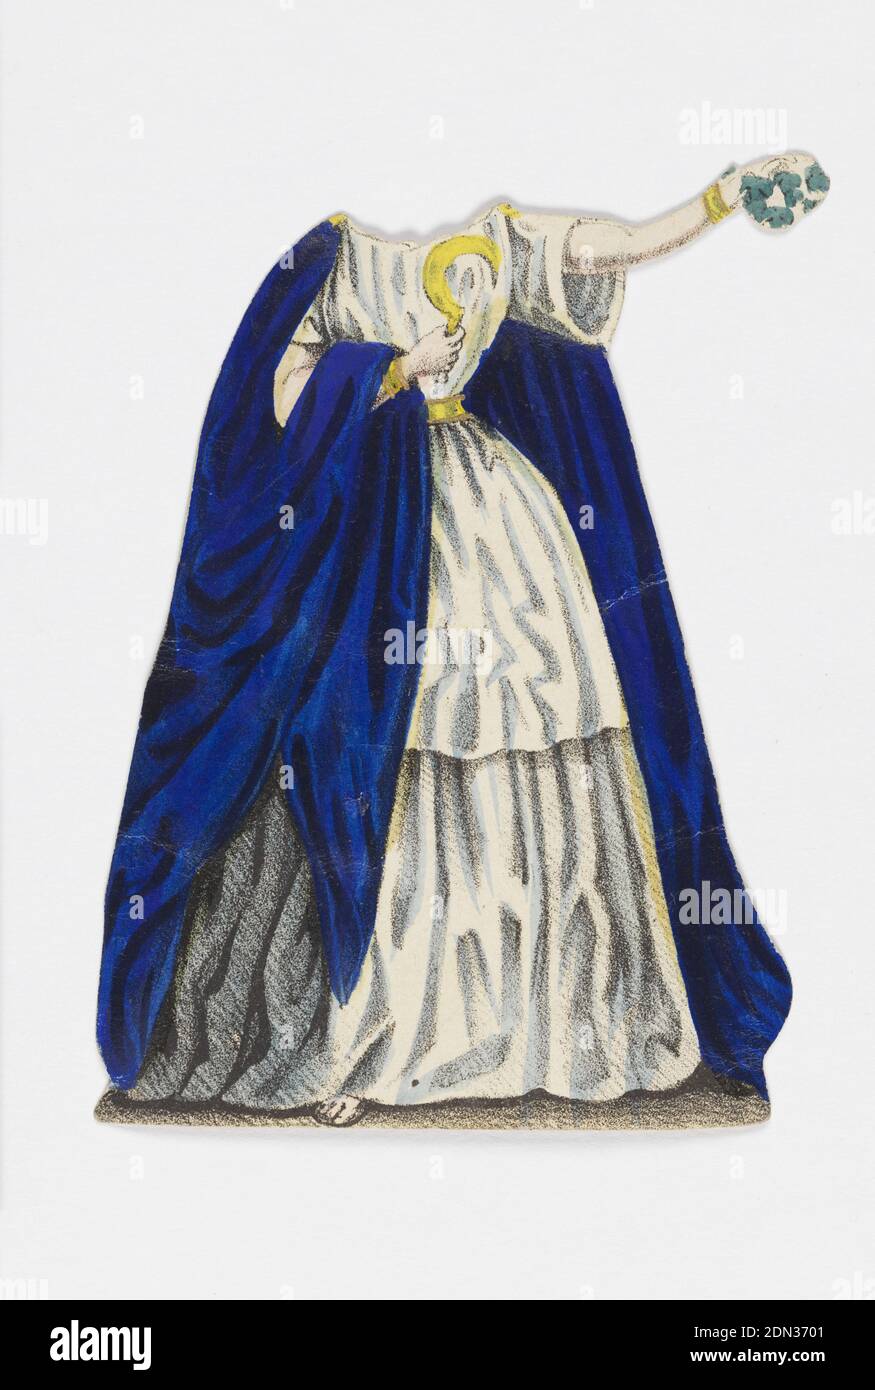 Jenny Lind Paper Doll Costume, Norma from the opera 'Norma', Lithograph on white wove paper, Paper doll costume for the figure of Jenny Lind representing the character Norma from the opera Norma., Designed to be placed over the doll., Europe, ca. 1850, toys & games, Print Stock Photo